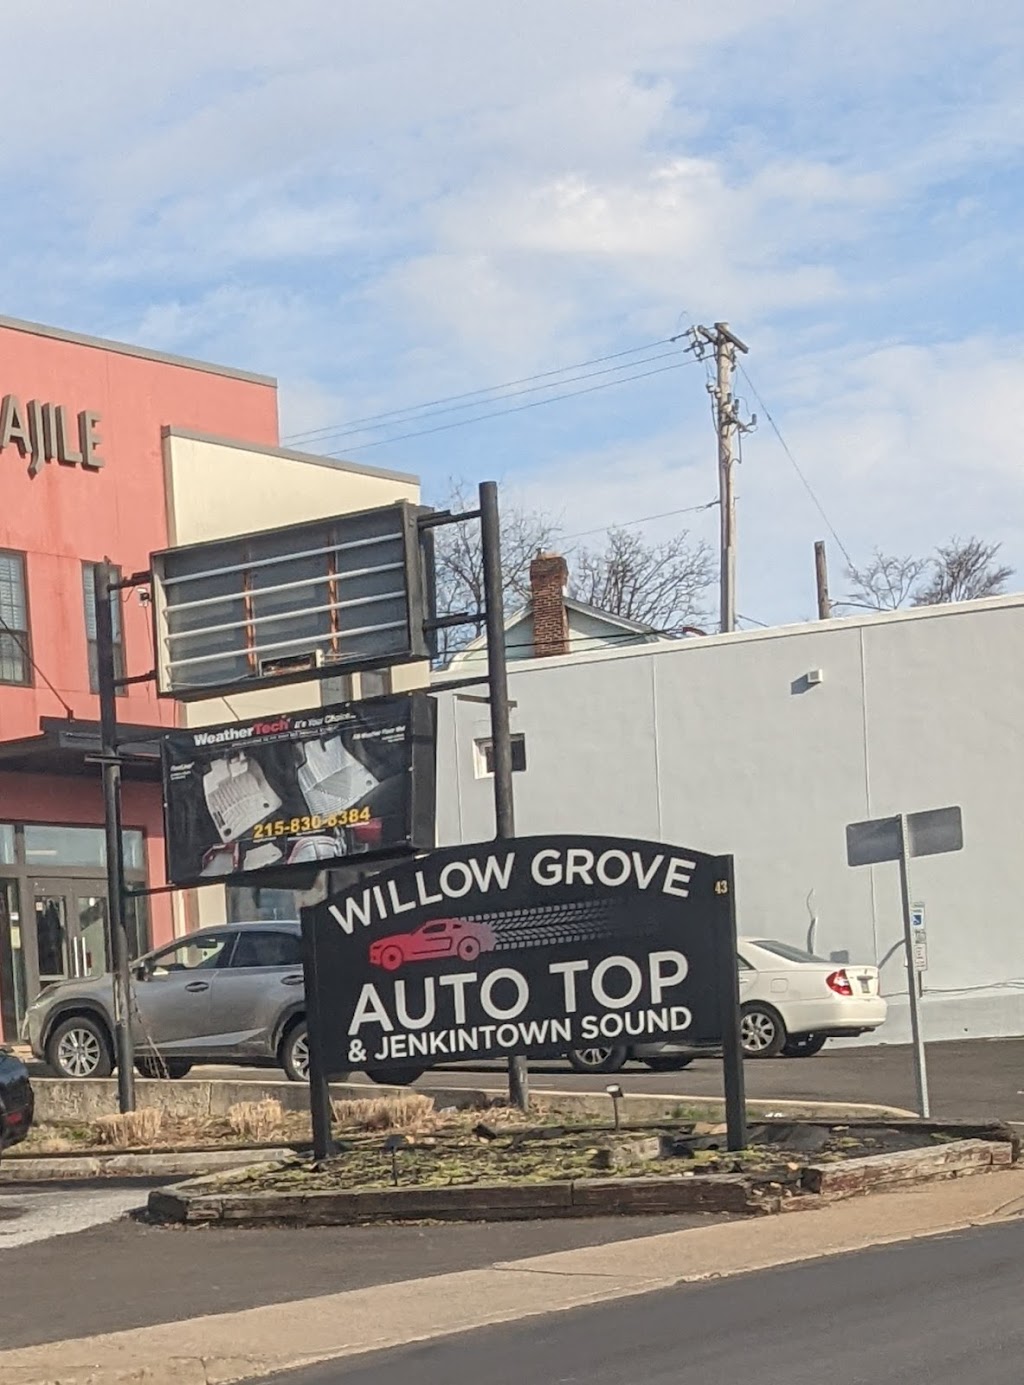 Willow Grove Auto Top | 43 N York Rd, Willow Grove, PA 19090 | Phone: (215) 830-8384